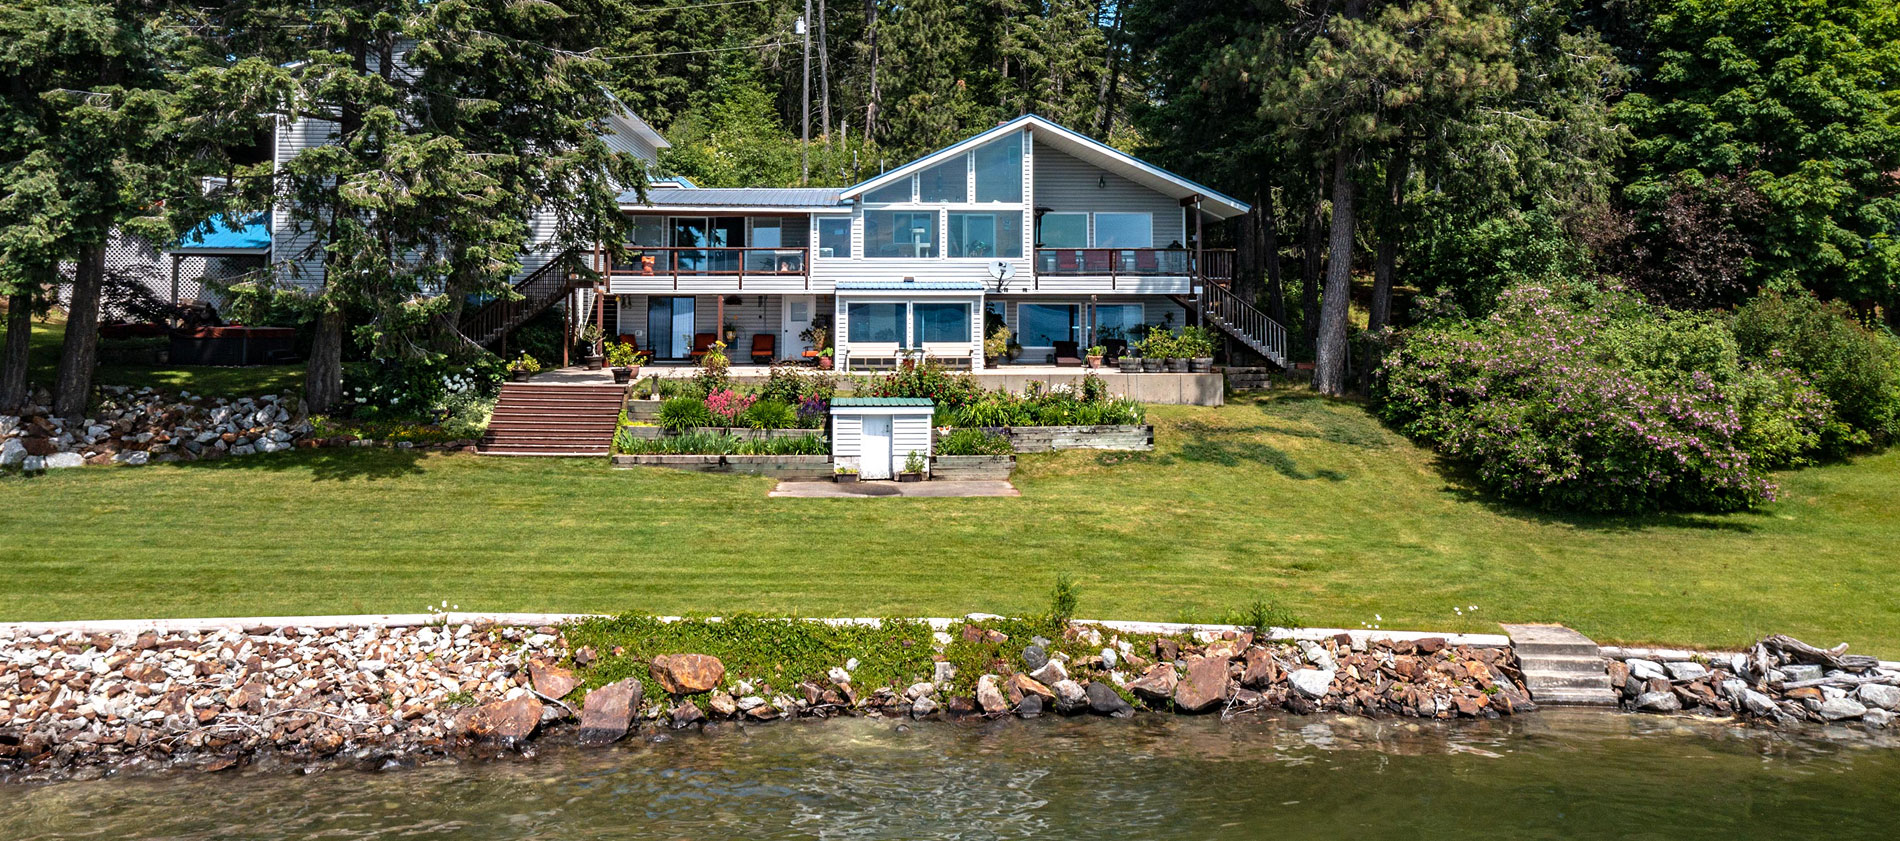 Enjoy 178 feet of your very own private shore line on beautiful Lake Pend Oreille.